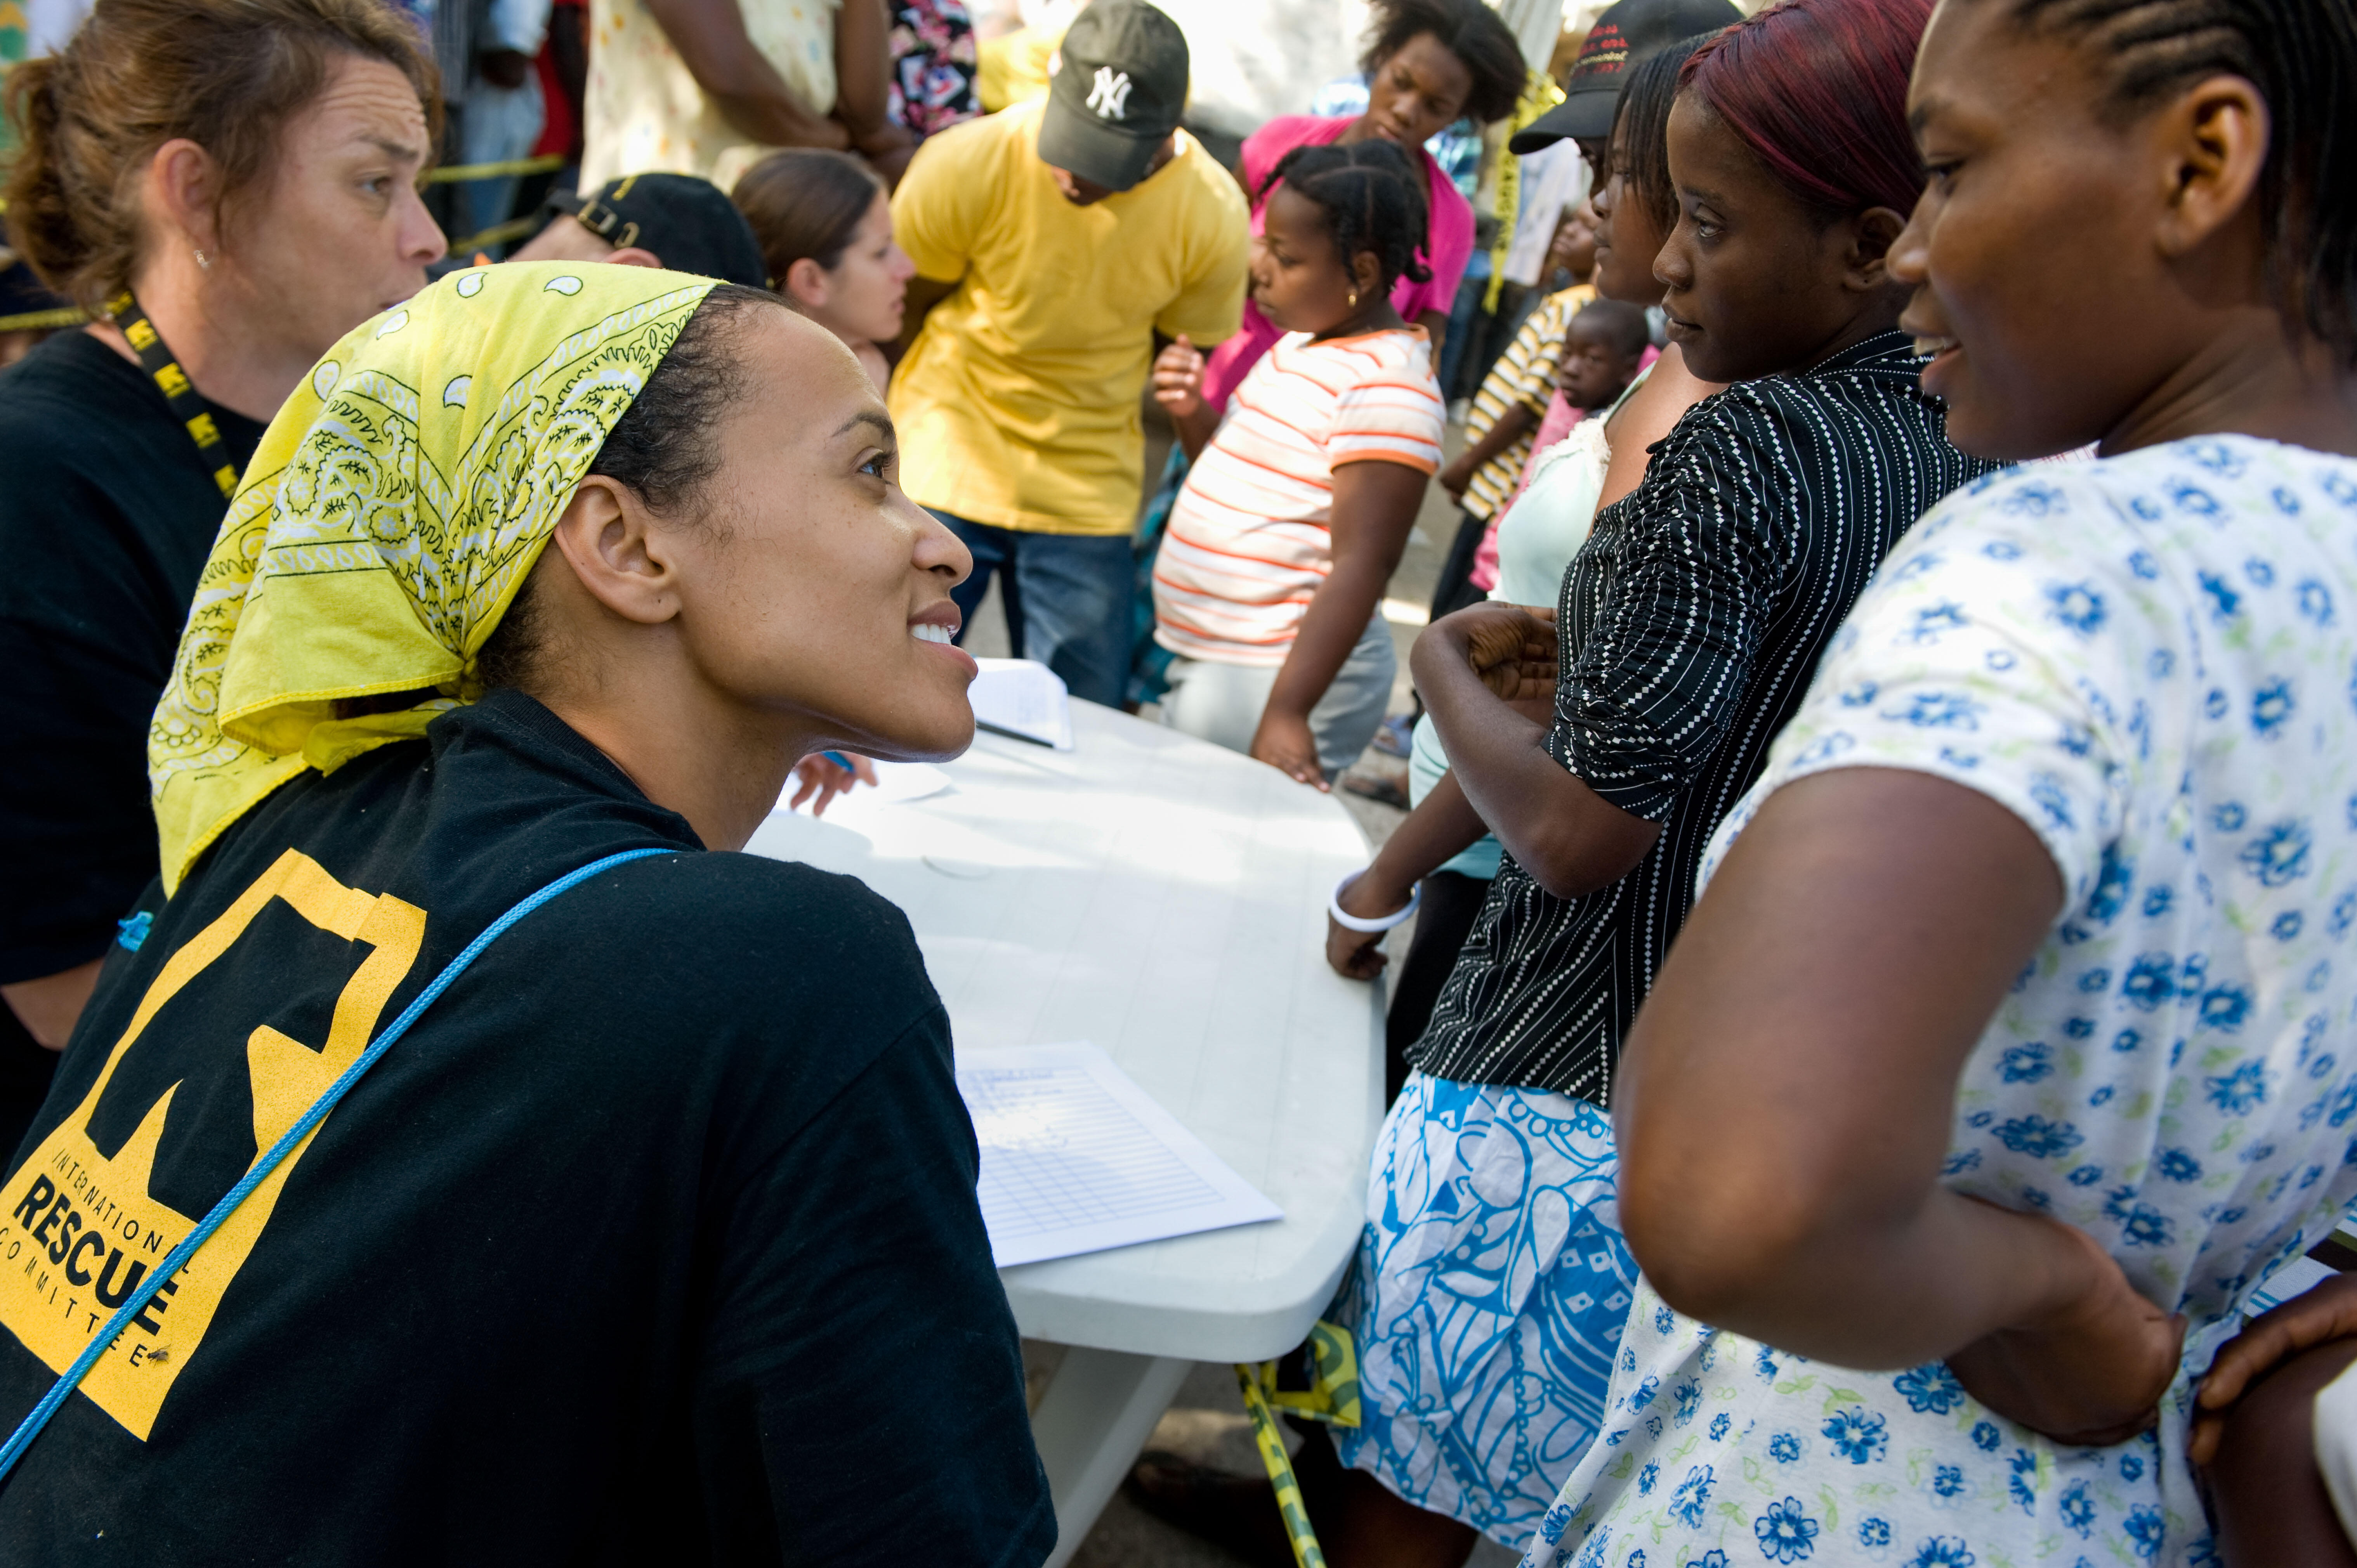 A woman wearing an IRC shirts smiles while interacting with a group of people waiting for humanitarian support.